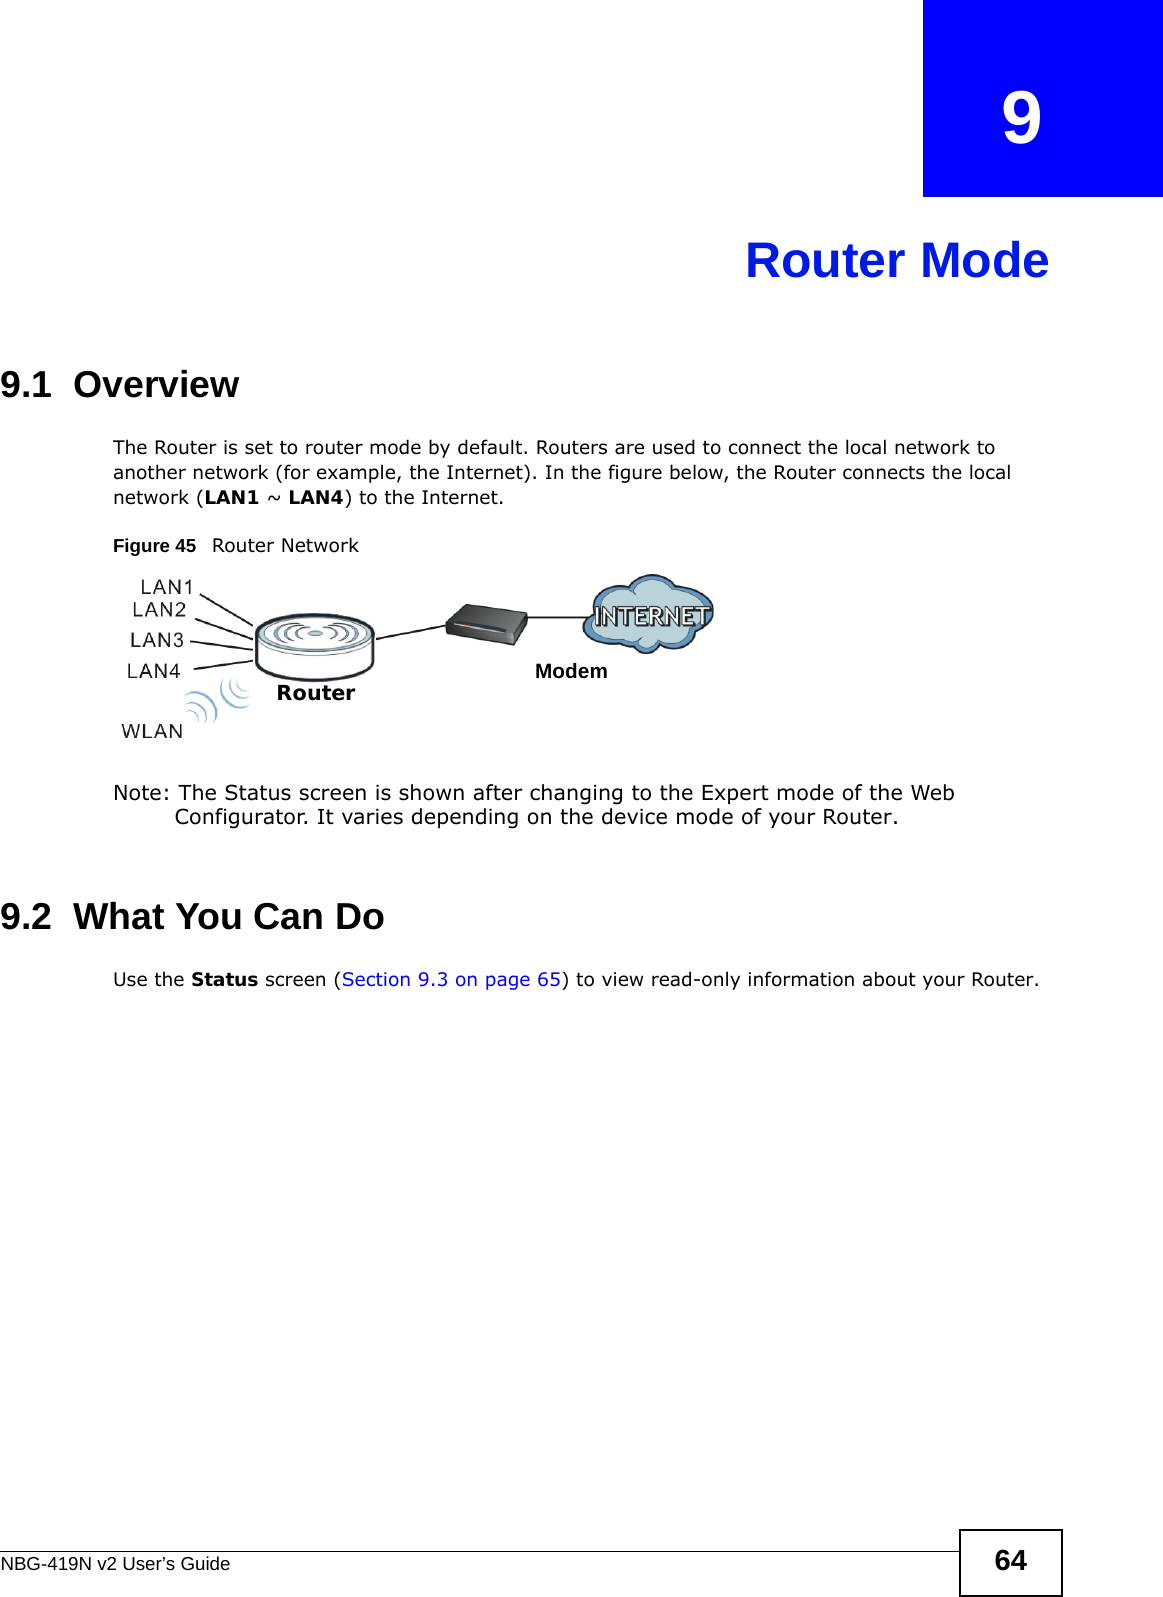 NBG-419N v2 User’s Guide 64CHAPTER   9Router Mode9.1  OverviewThe Router is set to router mode by default. Routers are used to connect the local network to another network (for example, the Internet). In the figure below, the Router connects the local network (LAN1 ~ LAN4) to the Internet.Figure 45   Router NetworkNote: The Status screen is shown after changing to the Expert mode of the Web Configurator. It varies depending on the device mode of your Router.9.2  What You Can DoUse the Status screen (Section 9.3 on page 65) to view read-only information about your Router.ModemRouter